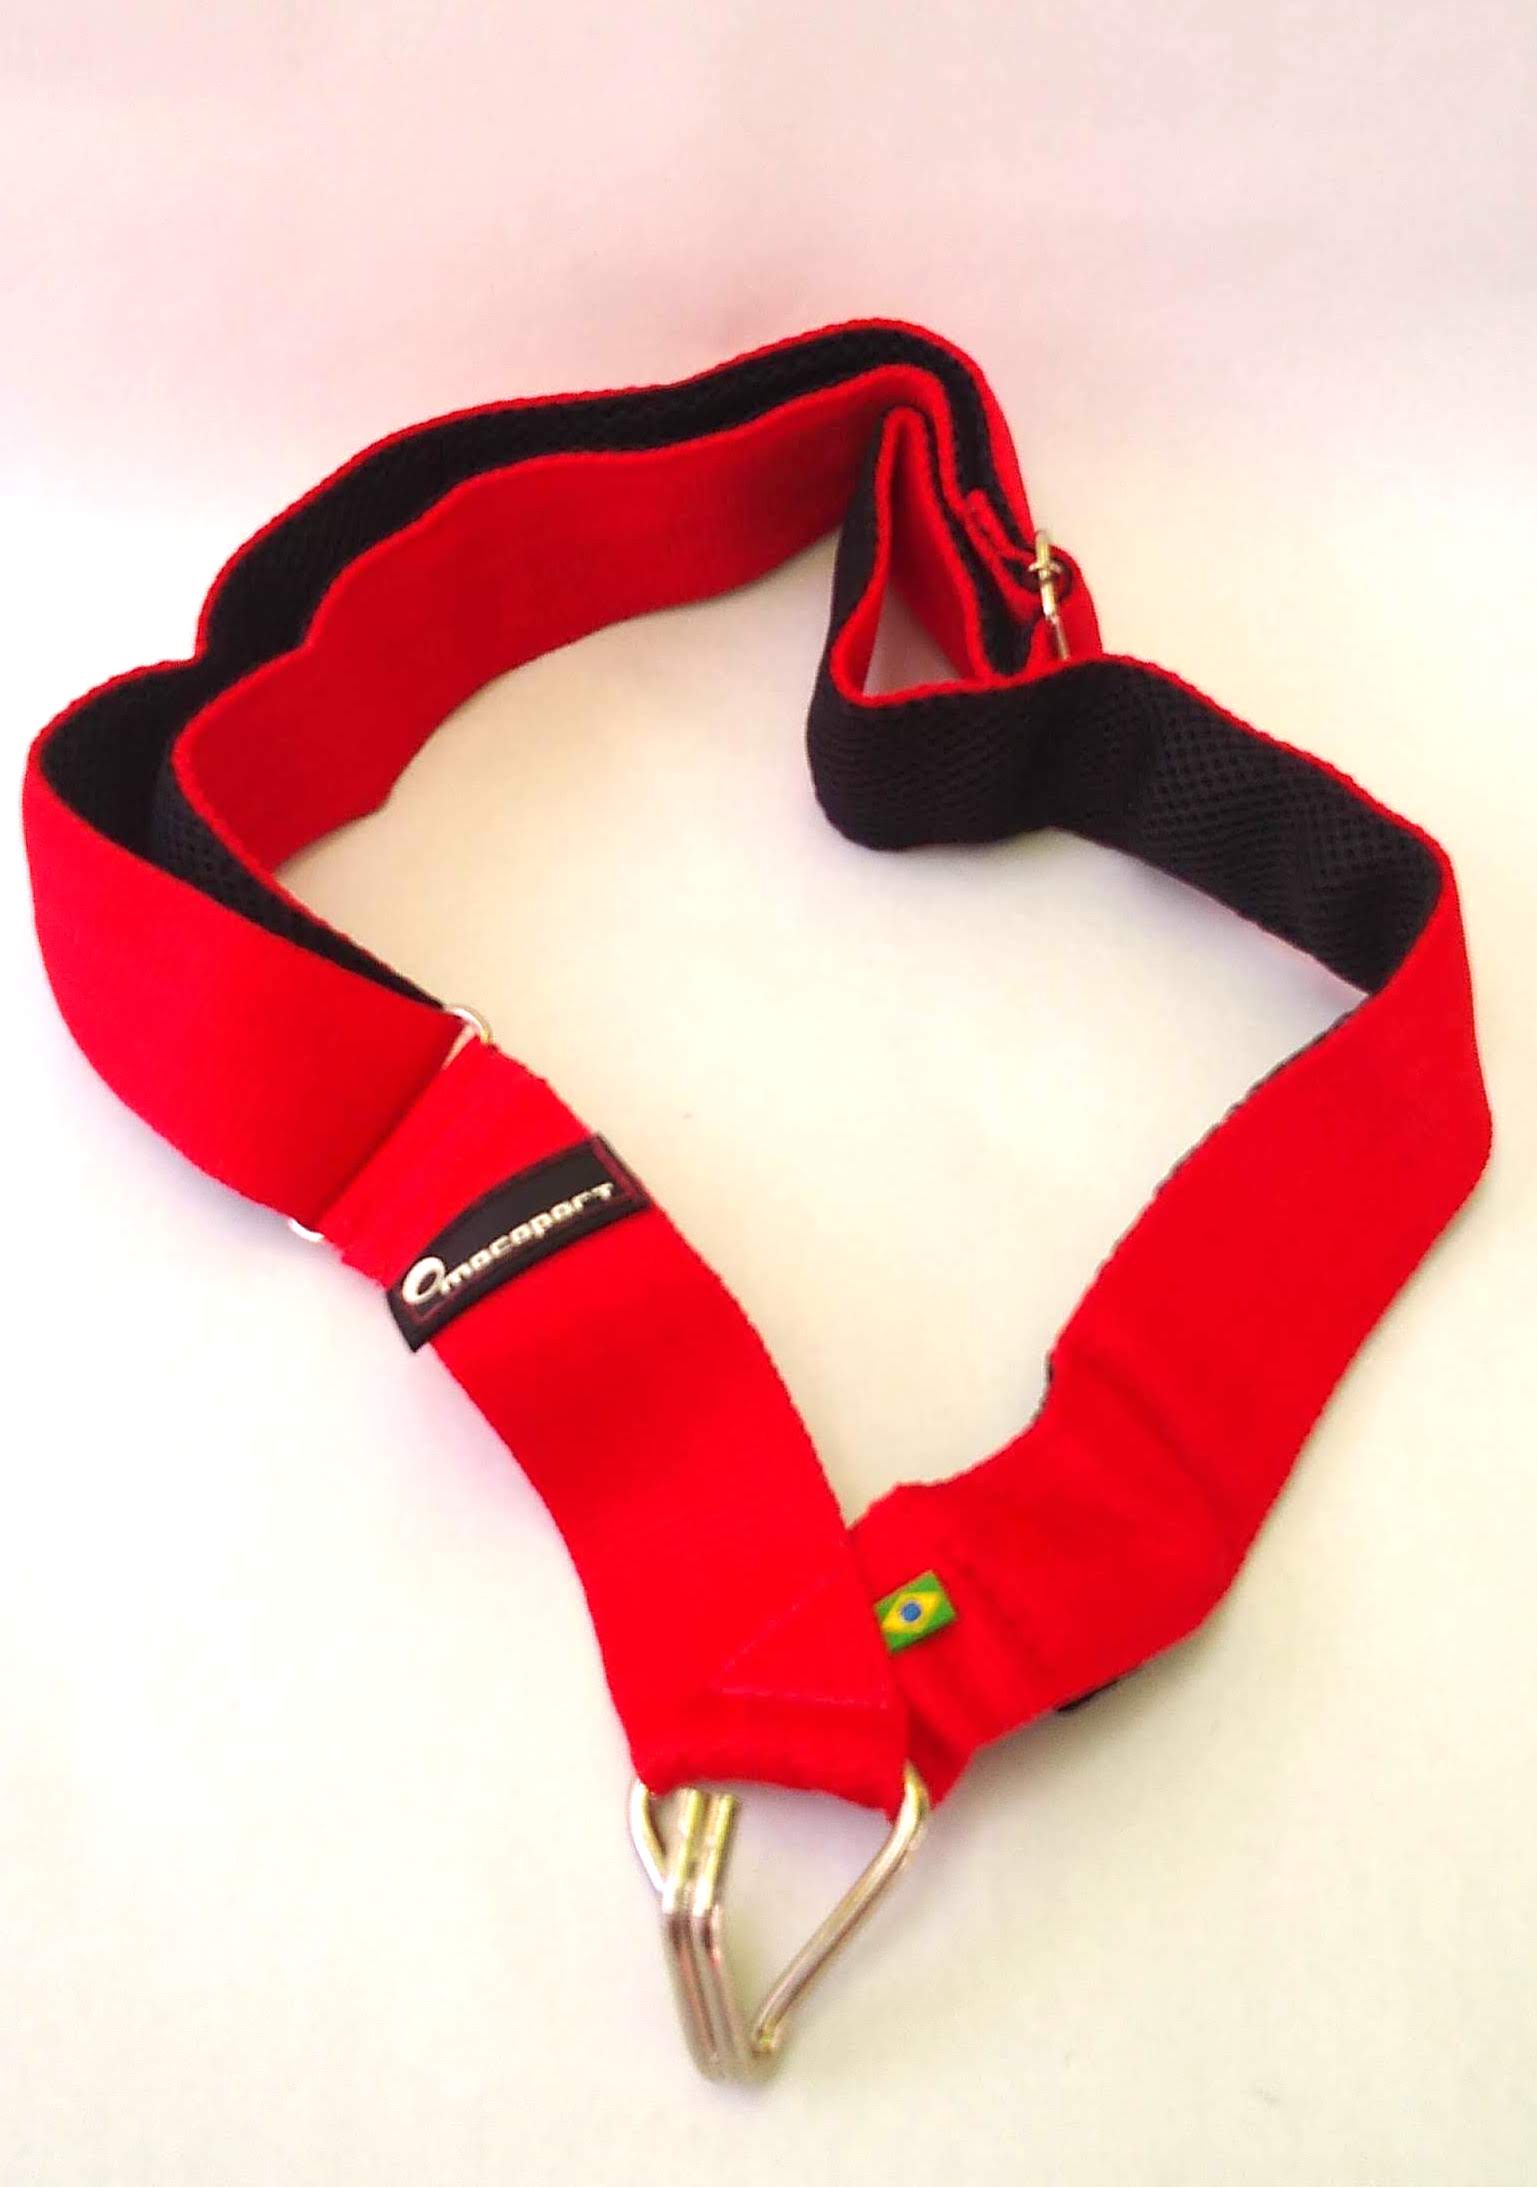 Macapart Strap, Shoulder strap, Single hook. 5 feet long and 2 inches wide.